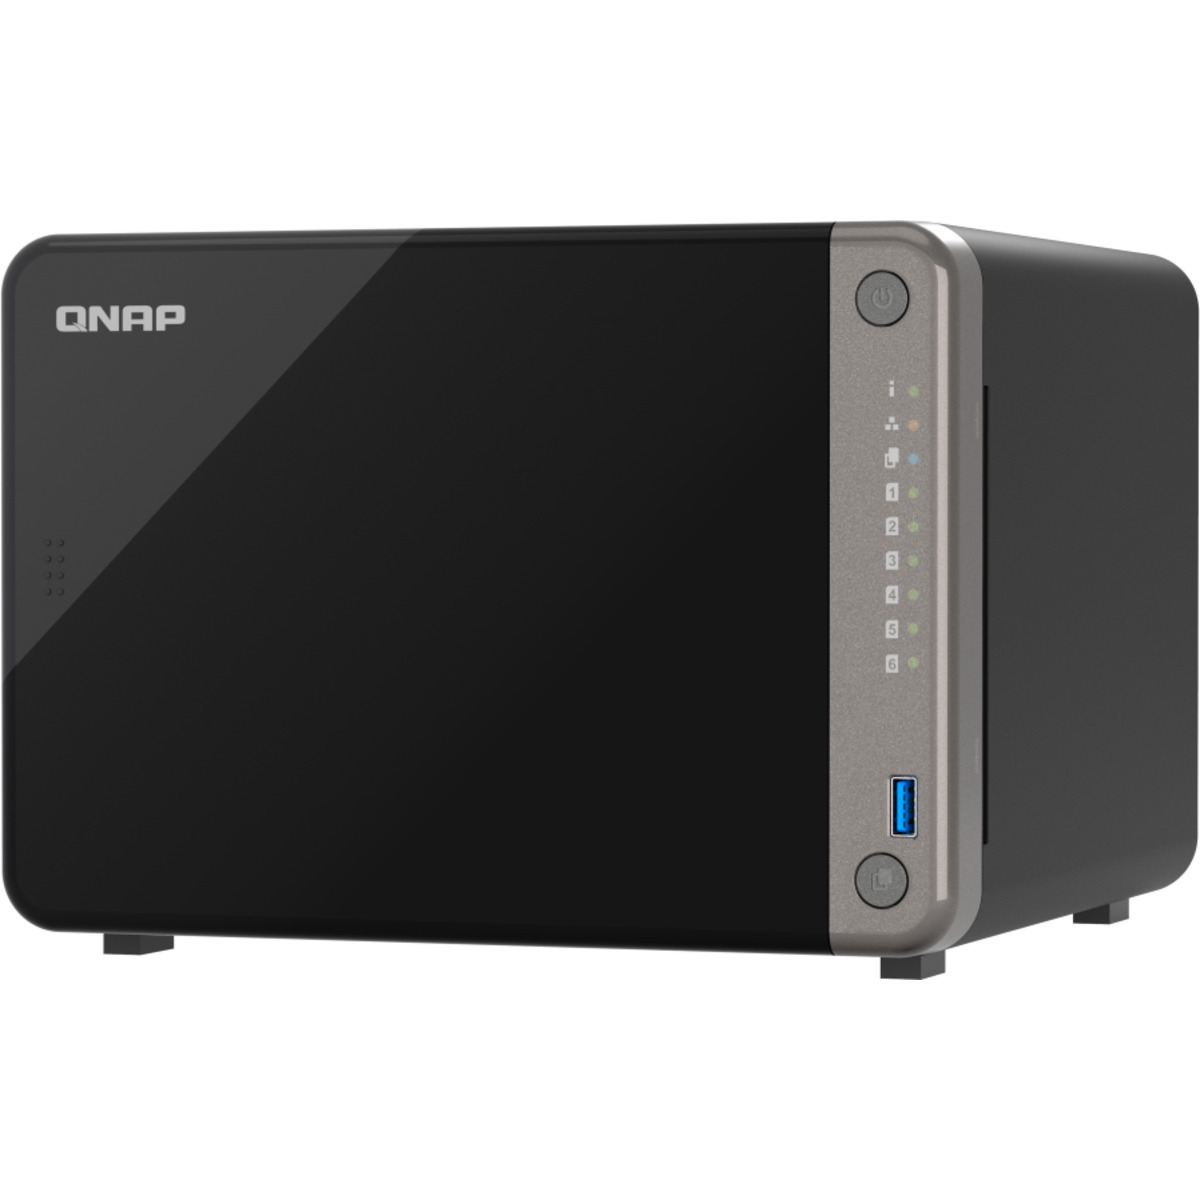 QNAP TS-AI642 50tb 6-Bay Desktop Multimedia / Power User / Business NAS - Network Attached Storage Device 5x10tb Seagate IronWolf Pro ST10000NT001 3.5 7200rpm SATA 6Gb/s HDD NAS Class Drives Installed - Burn-In Tested - ON SALE TS-AI642